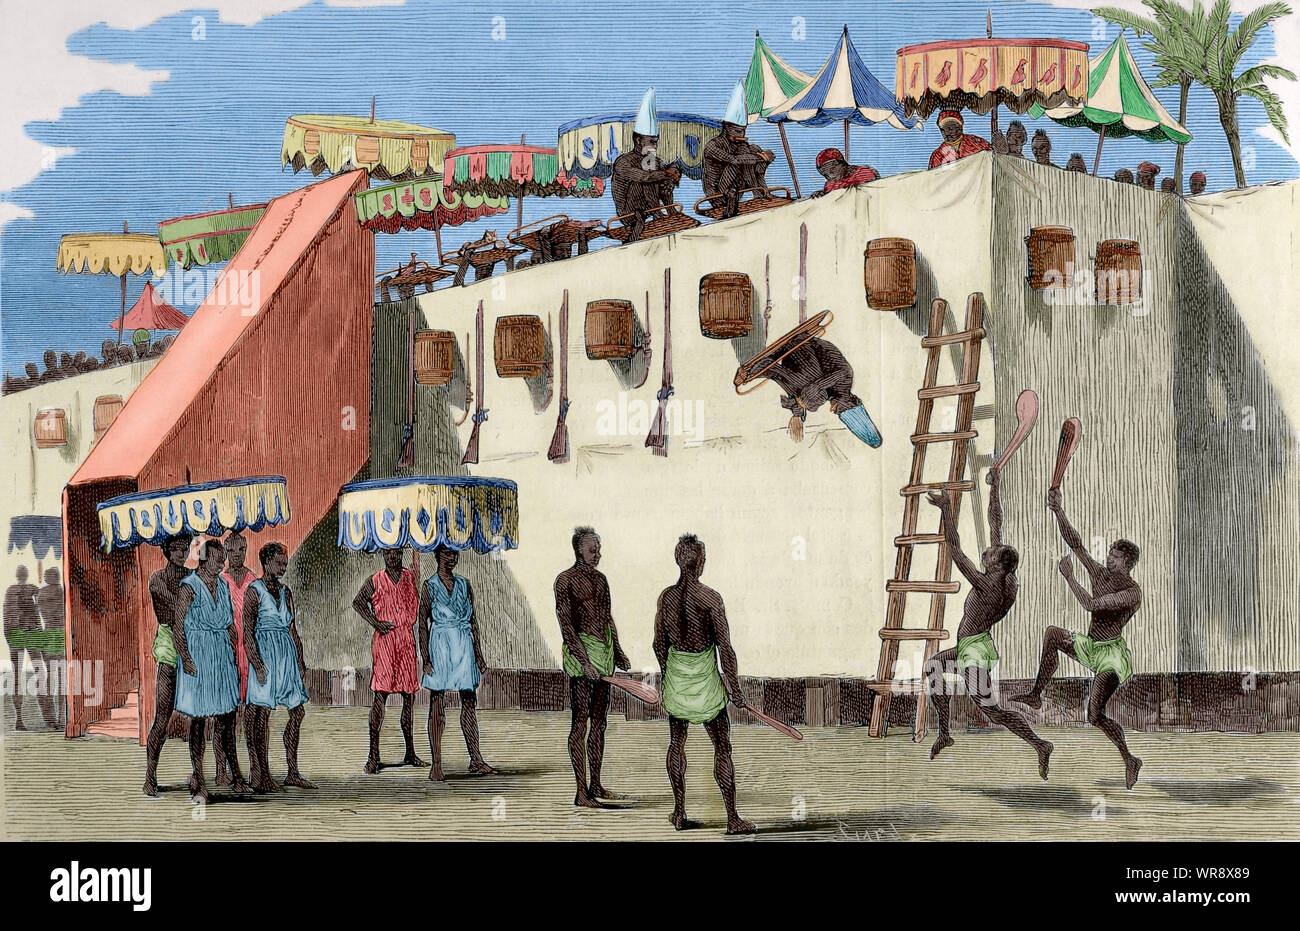 The Annual Customs of Dahomey. The main yearly celebration in the Kingdom of Dahomey (currently Benin), held at the capital, Abomey, in early autumn as a tribute to the invisible spirits. At that time, taxes were collected, the price was fixed in current currency, military and civilian commanders were appointed, good deeds were rewarded and criminals were severely punished, from which the victims destined for the Annual Customs were chosen. On the assigned day they appeared on a high platform and, in baskets, were thrown into a void, dying beheaded by the executioners. Engraving by Capuz. La I Stock Photo